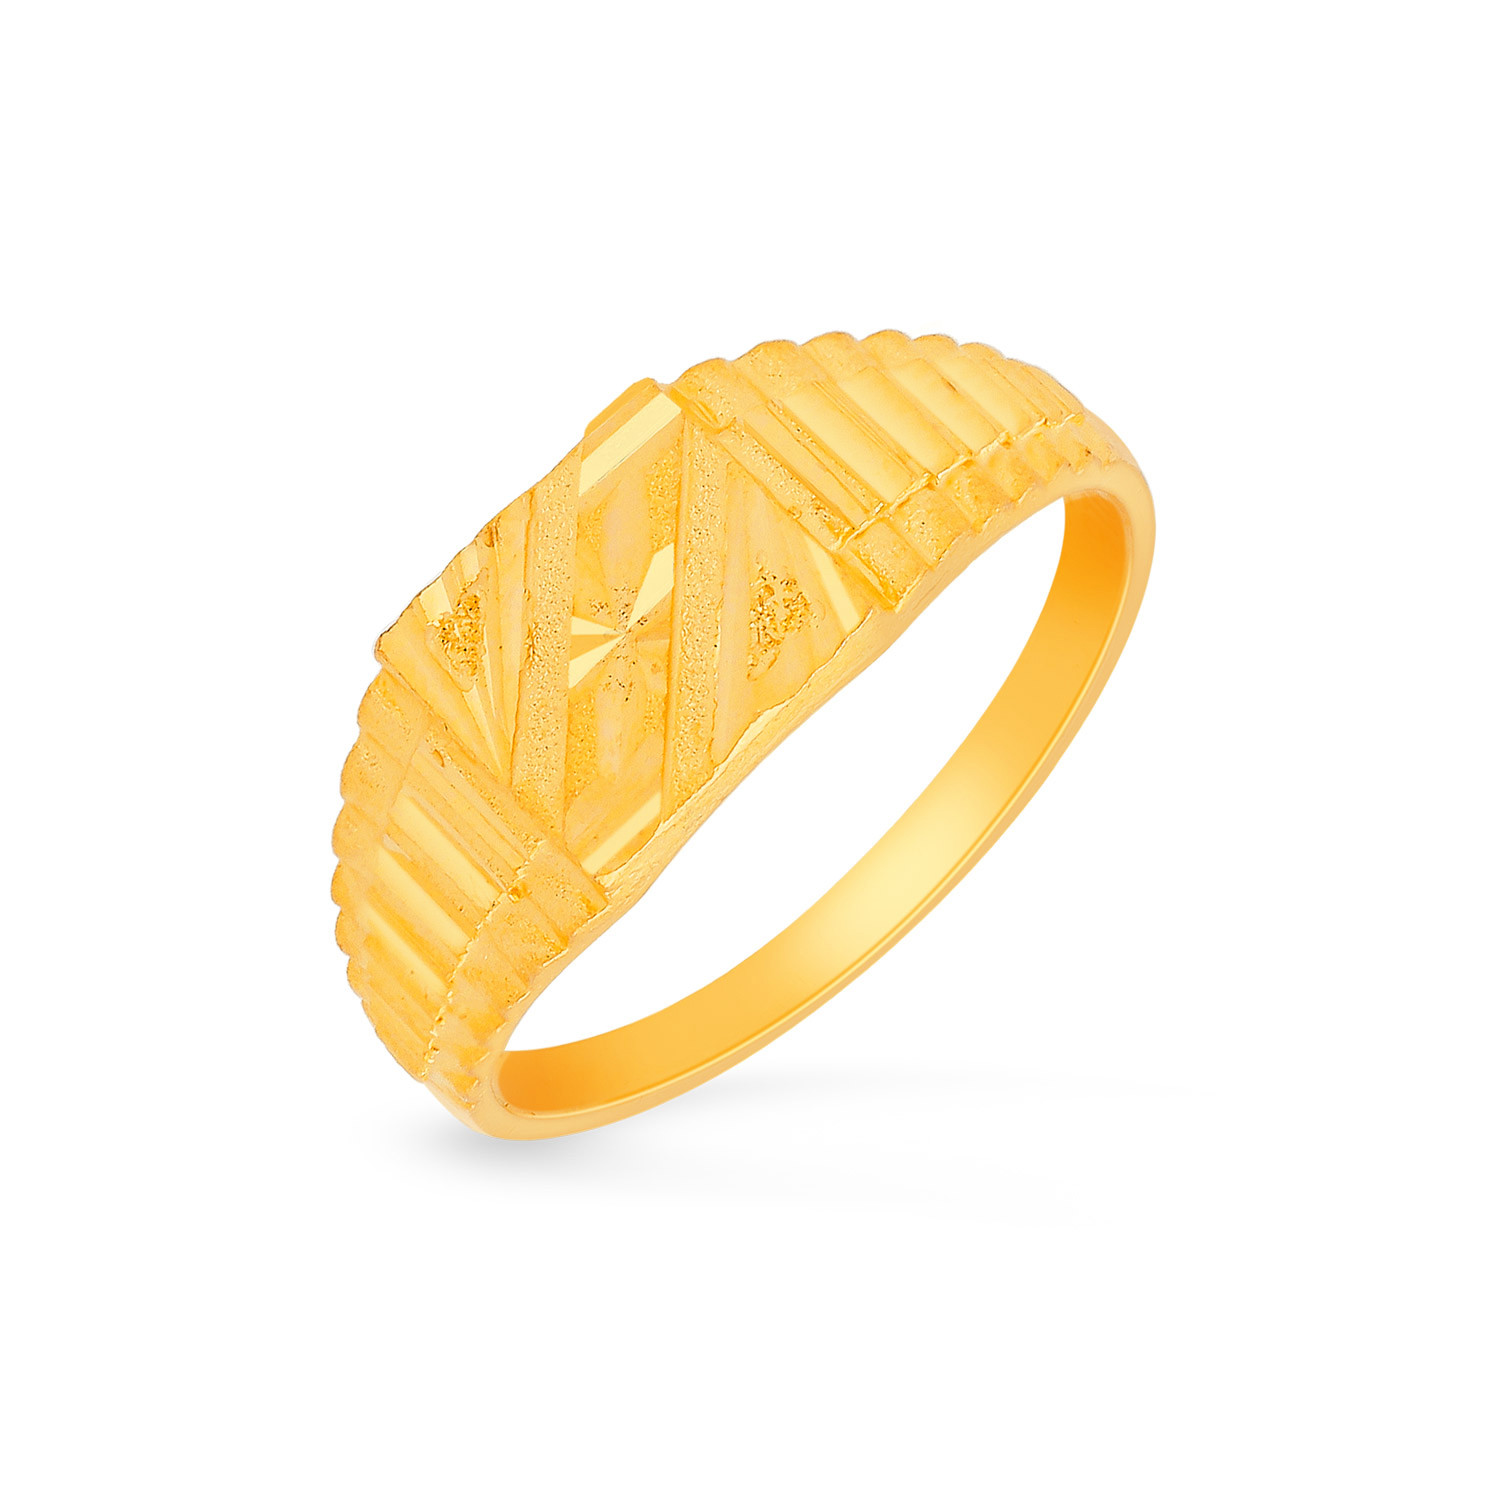 Buy Malabar Gold 22 KT Gold Cocktail Ring for Women Online